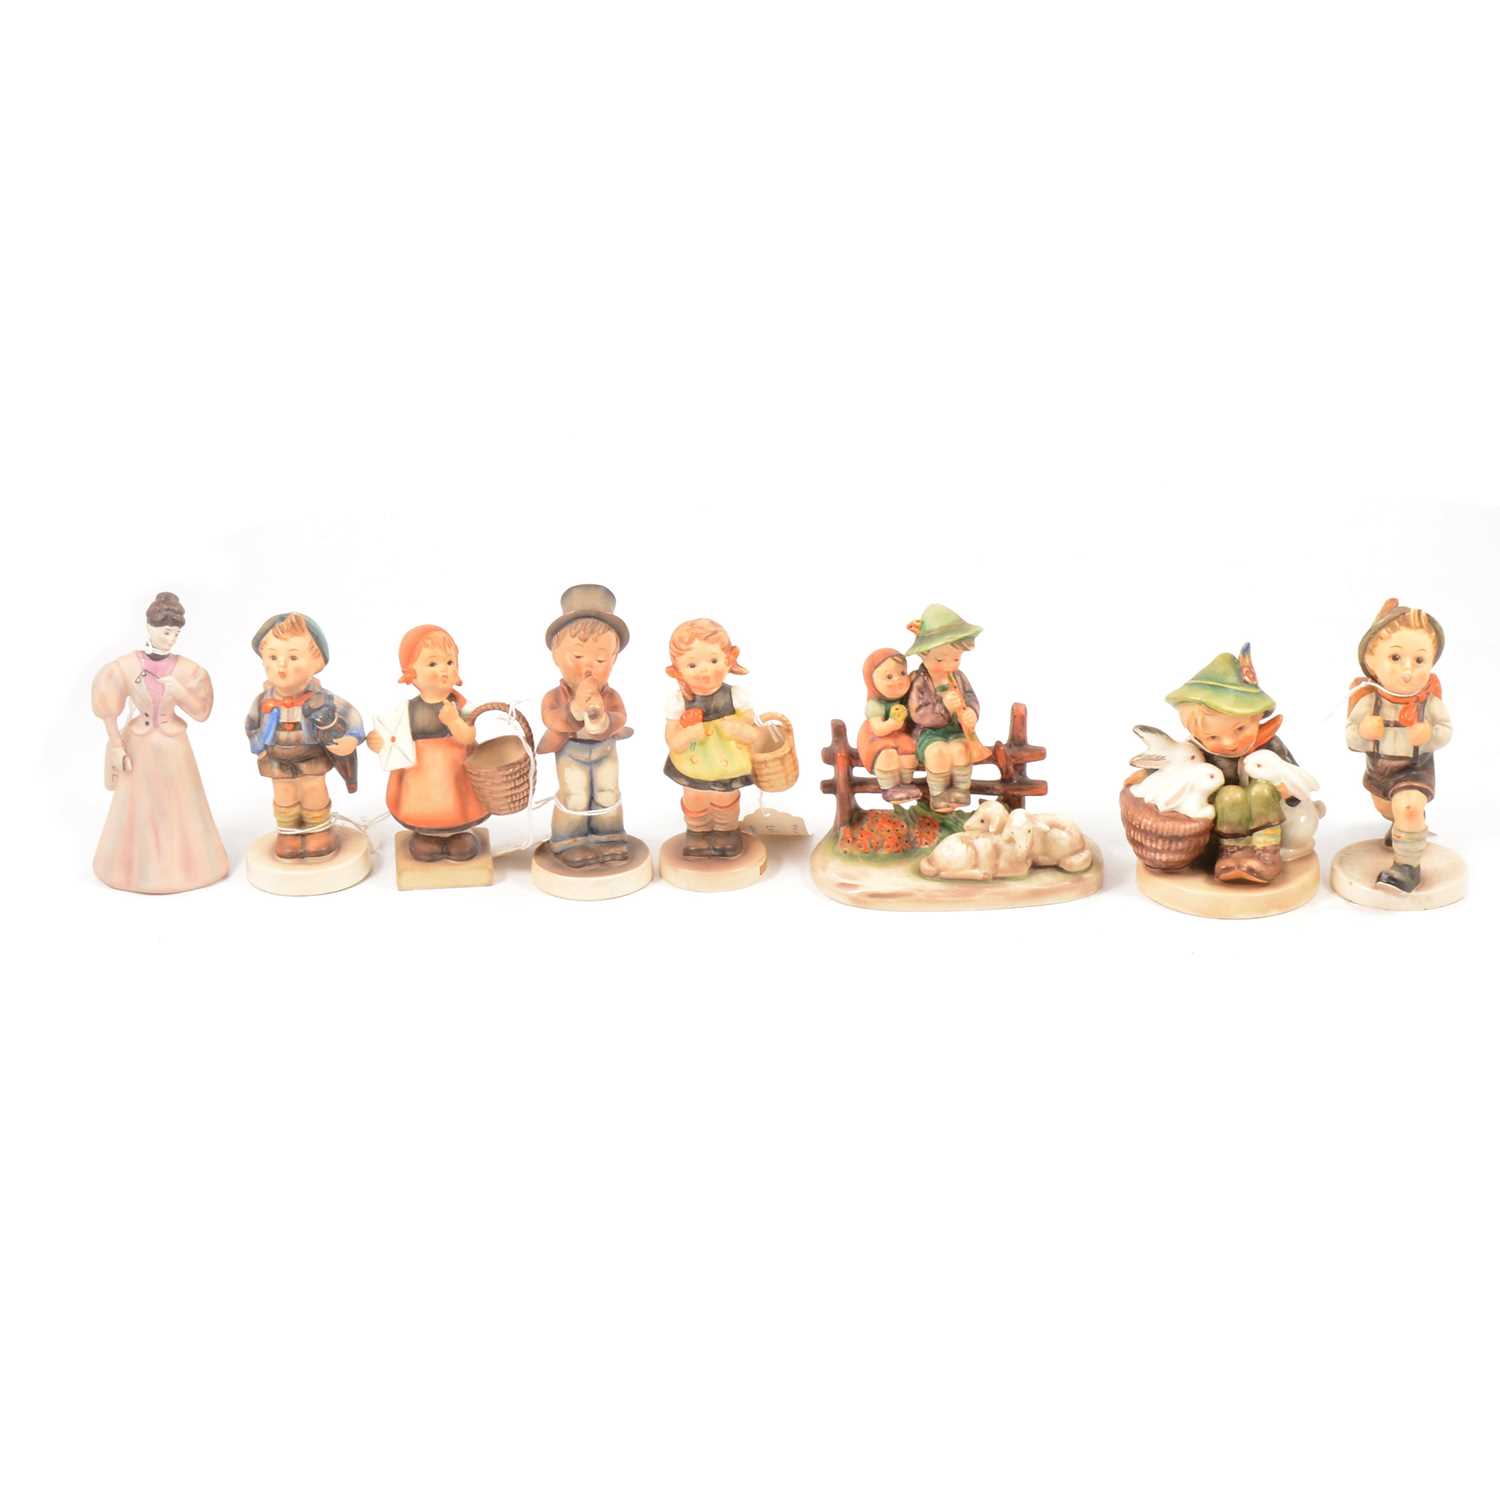 Lot 16 - Collection of ornaments including Hummell and Gobel figures.